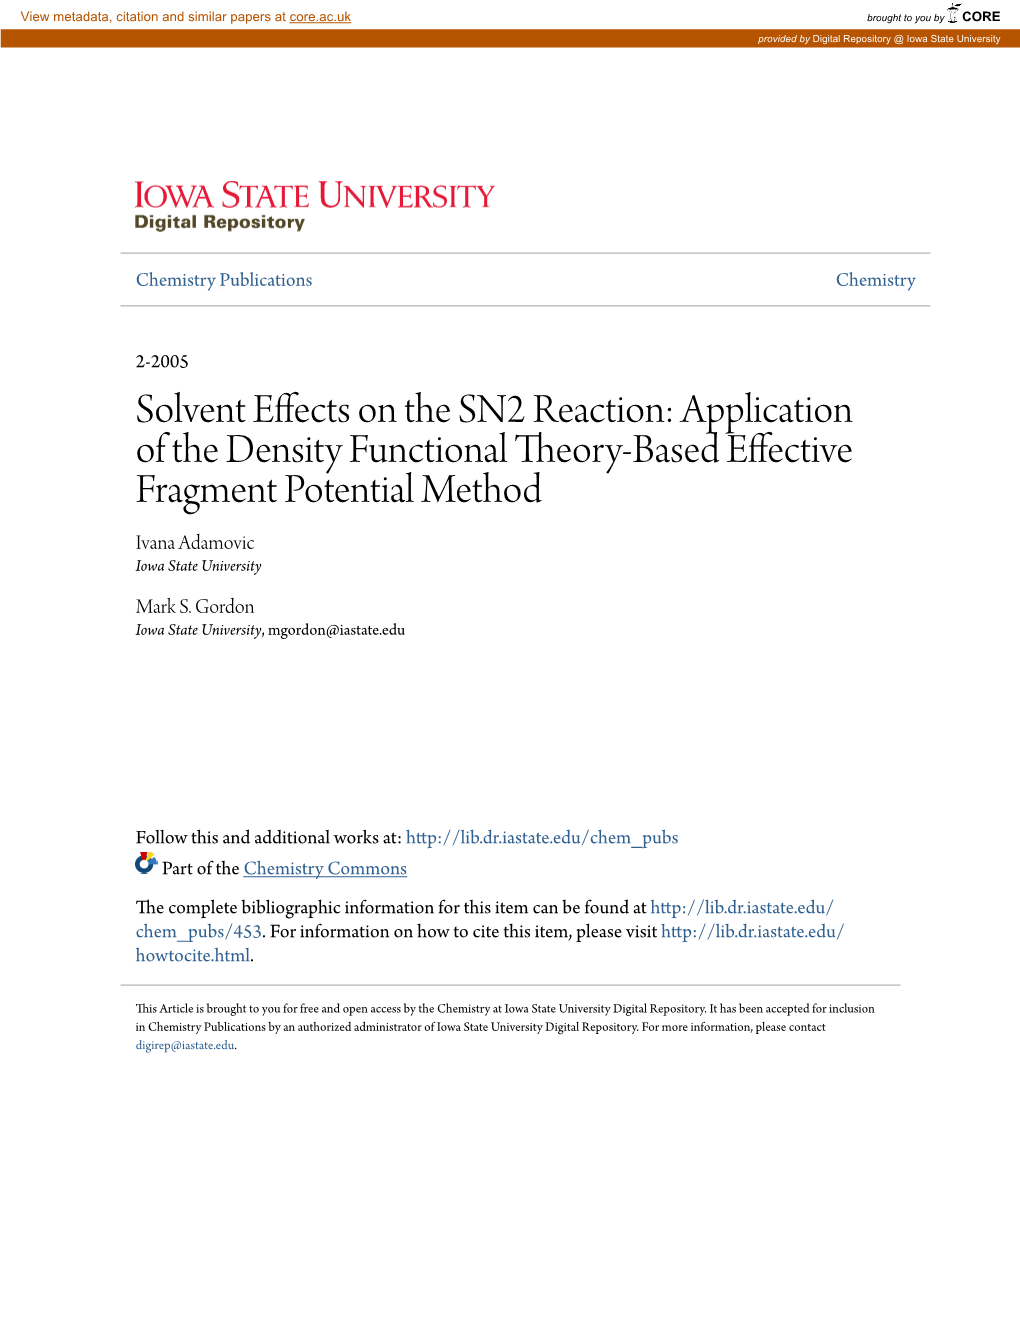 Solvent Effects on the SN2 Reaction: Application of the Density Functional Theory-Based Effective Fragment Potential Method Ivana Adamovic Iowa State University